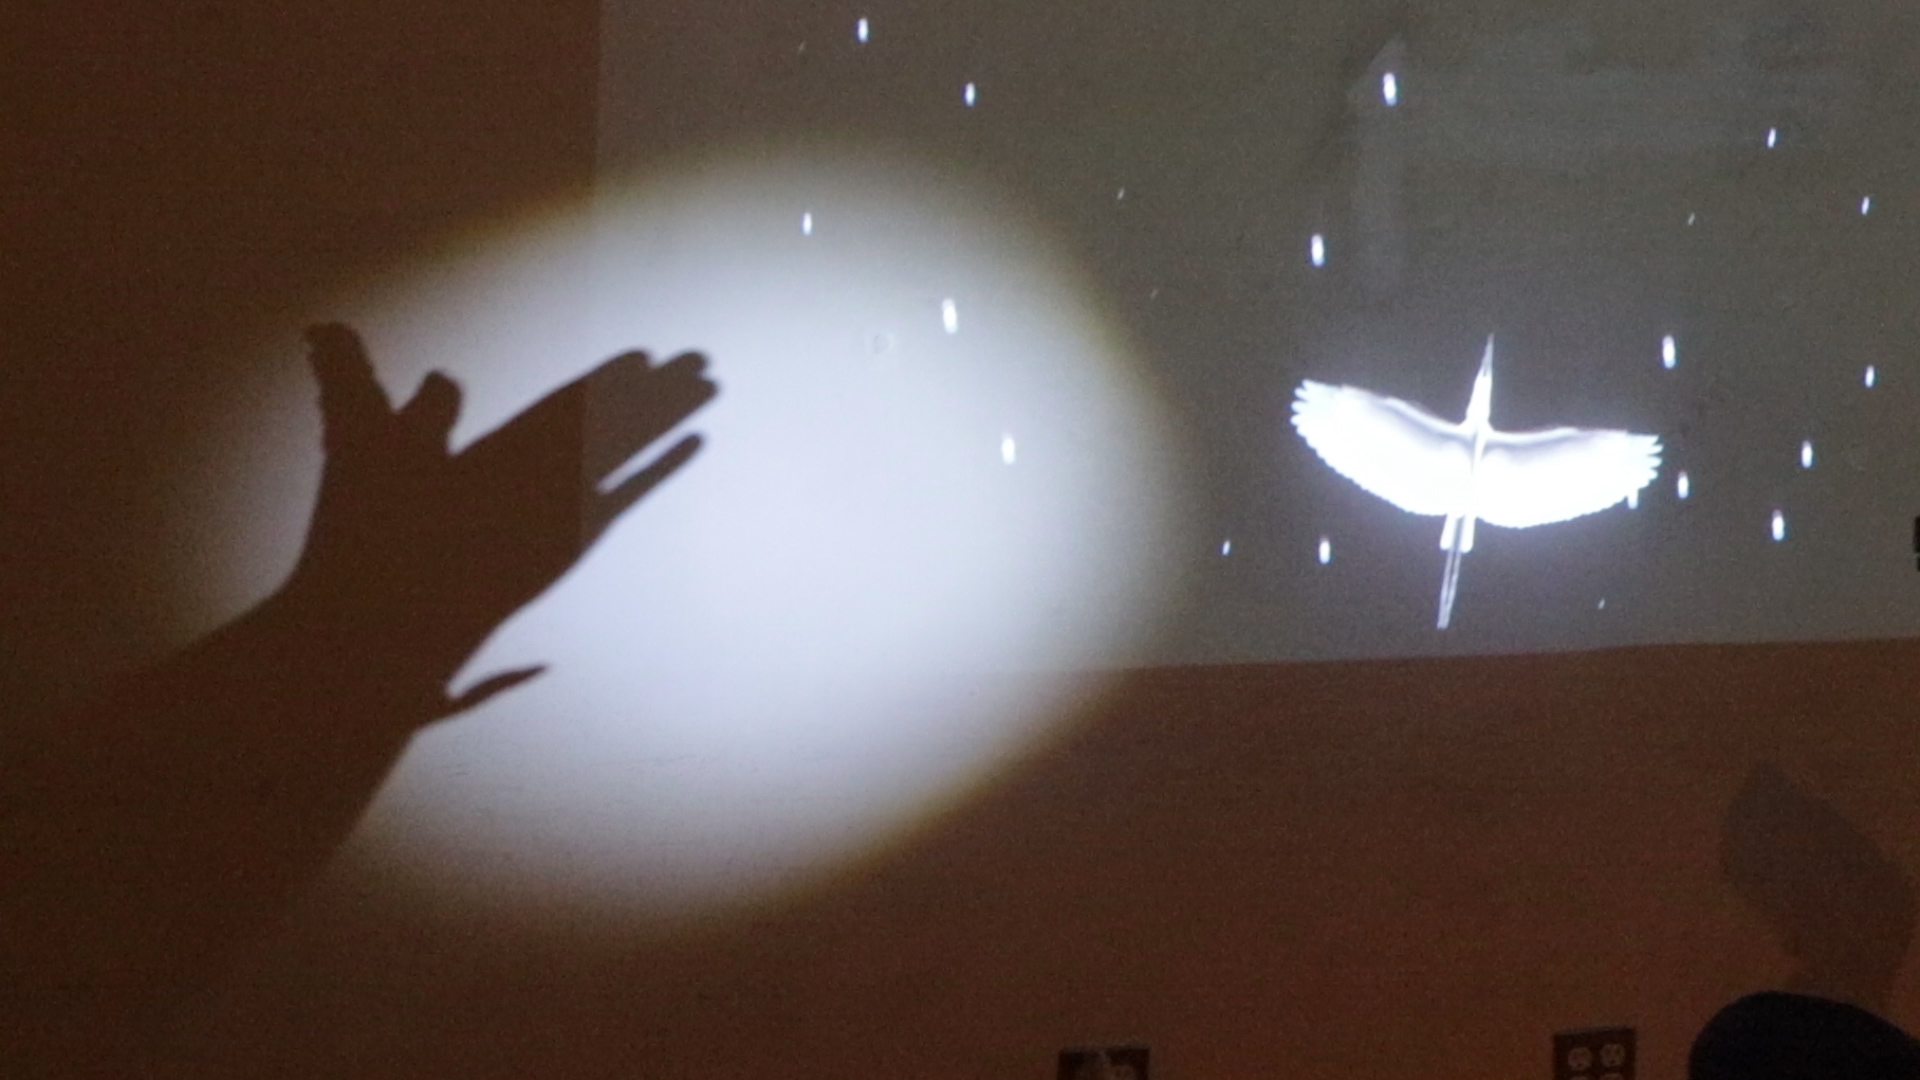 A project that revivifies and sets free shadow puppets from your childhood memories